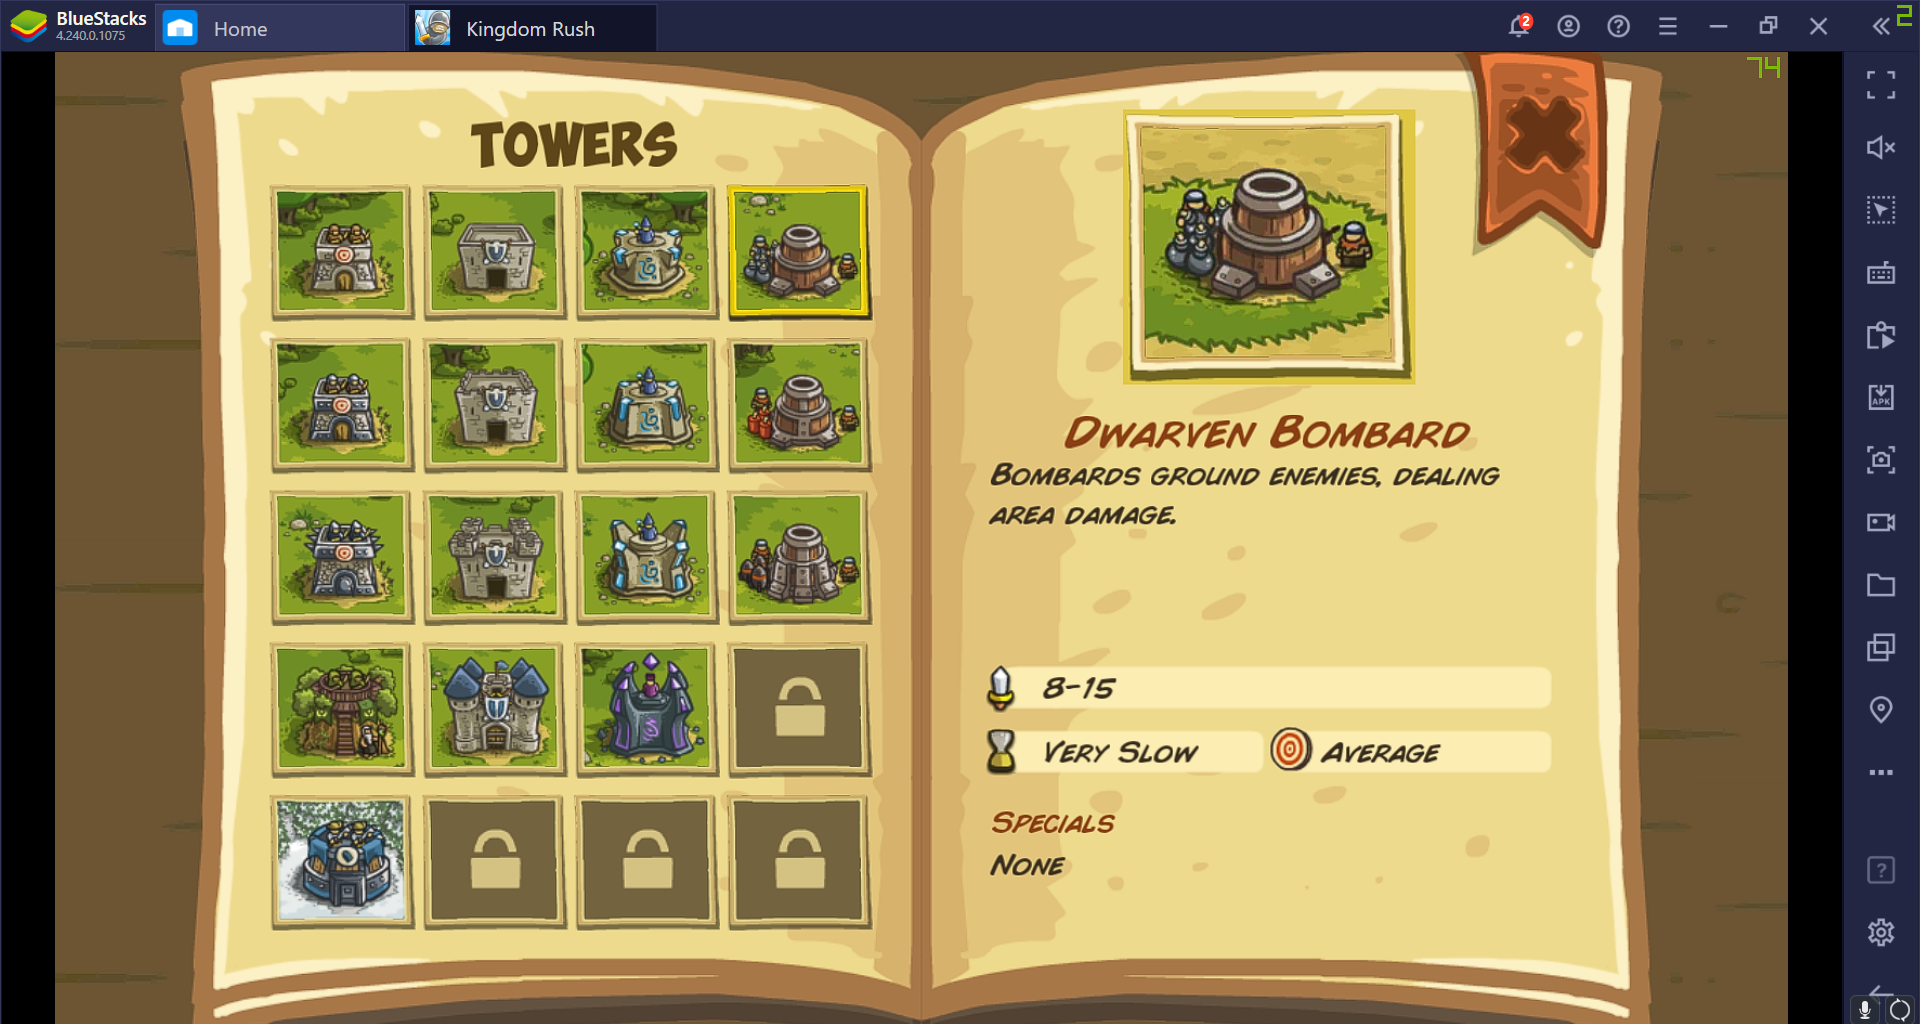 Tips and Tricks to Get Better at Kingdom Rush on PC